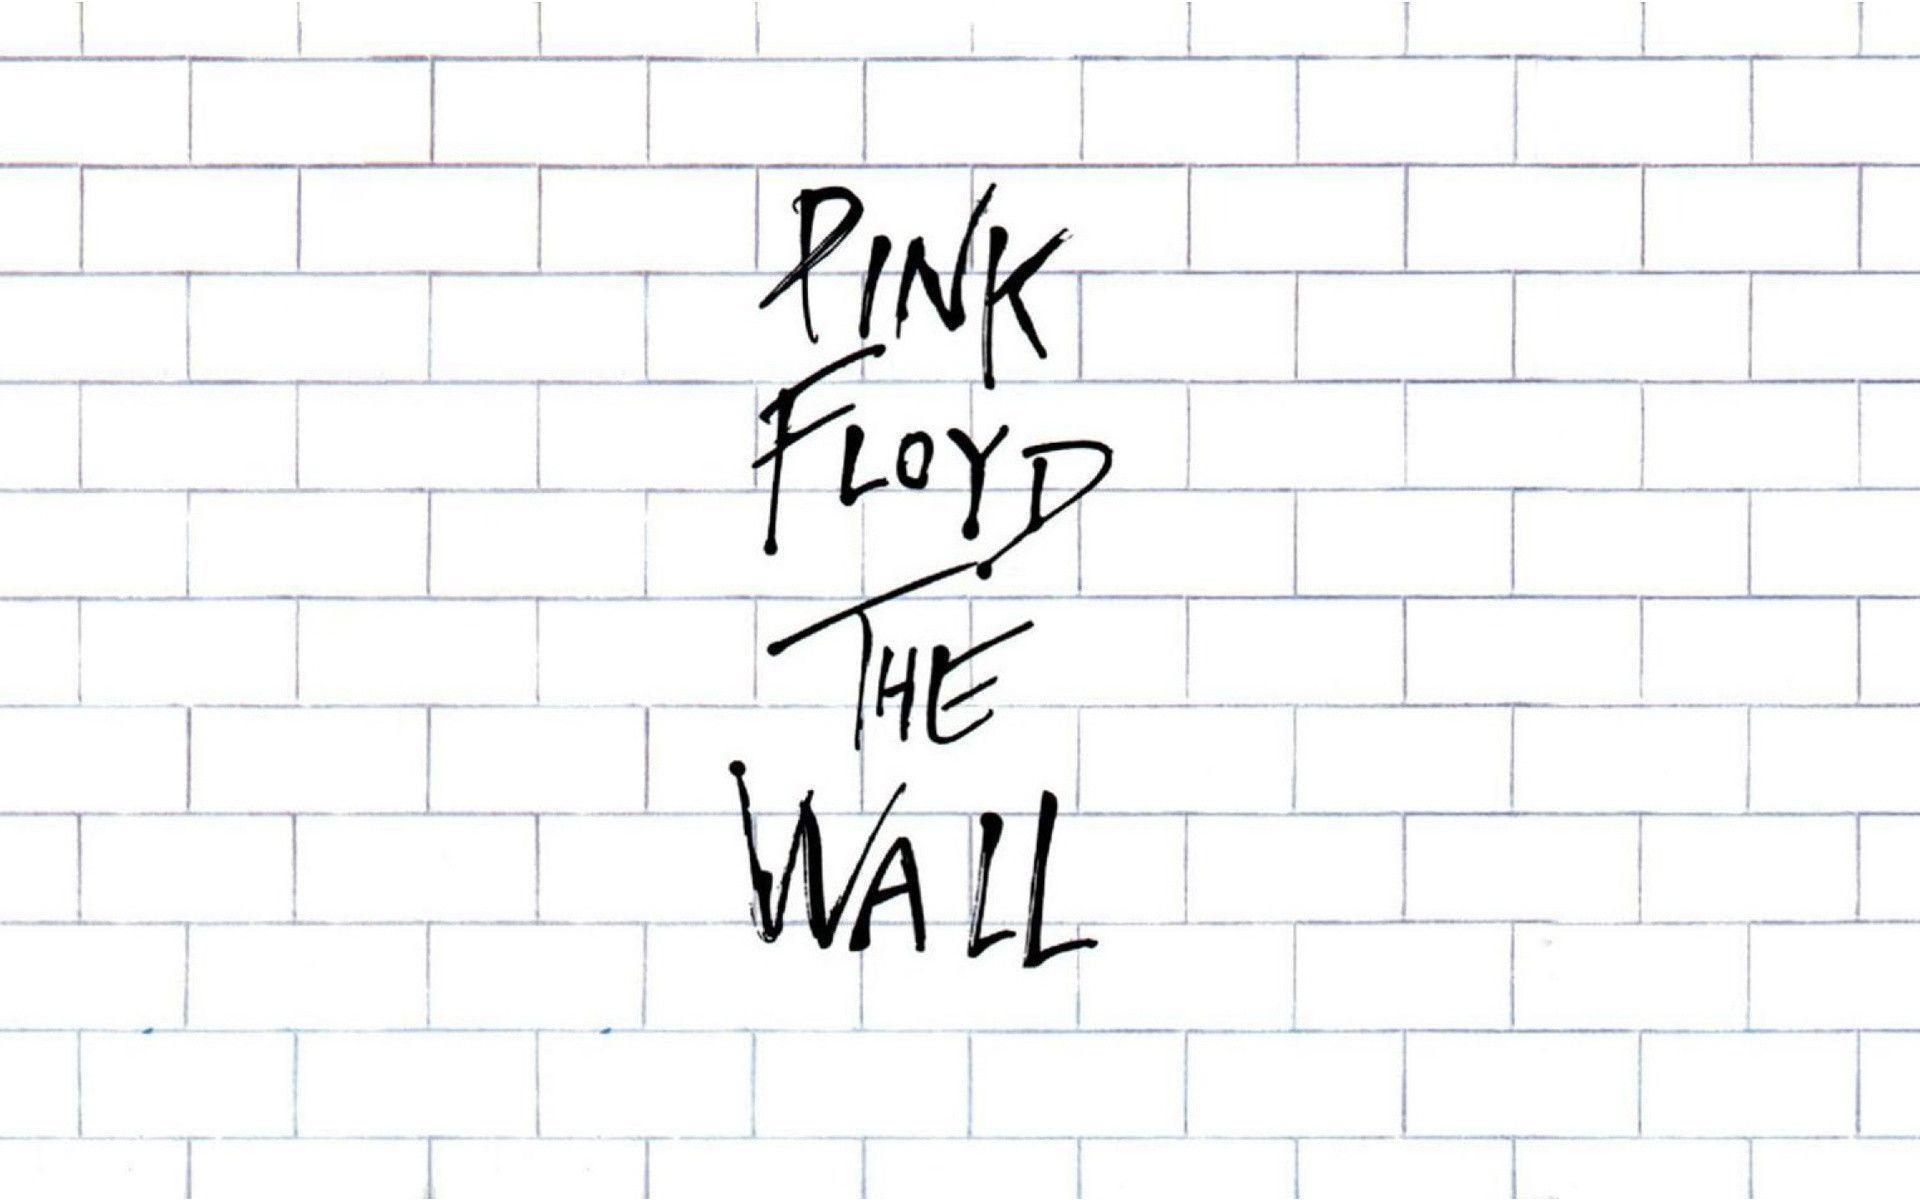 10 Latest Pink Floyd The Wall Wallpaper FULL HD 1080p For PC Desktop